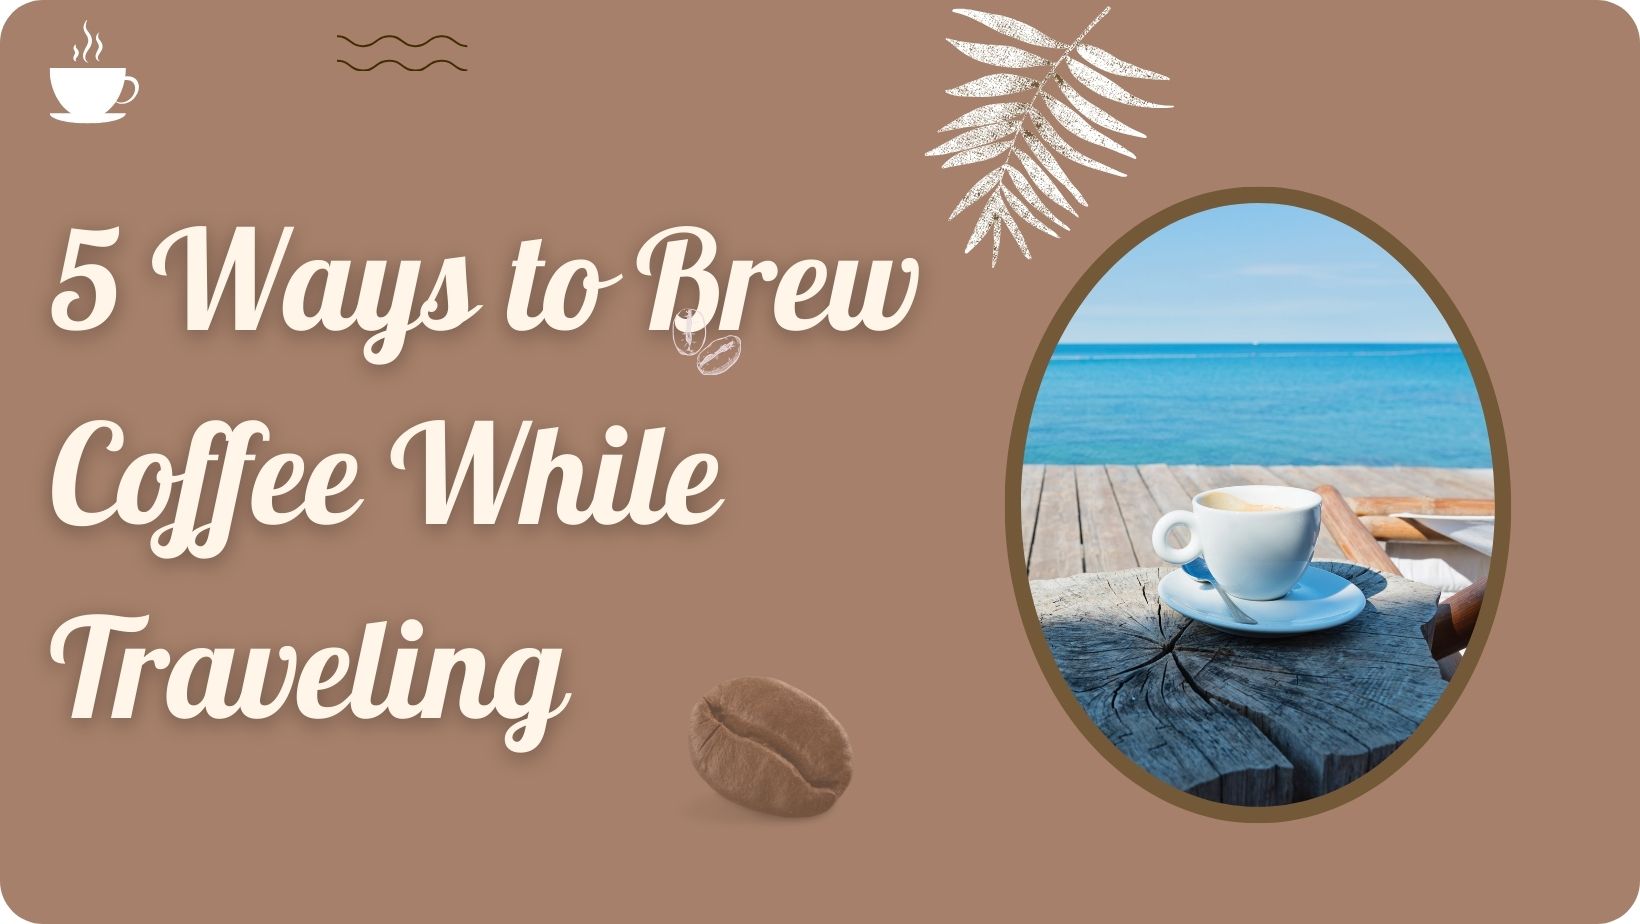 5 Ways to Brew Coffee While Traveling